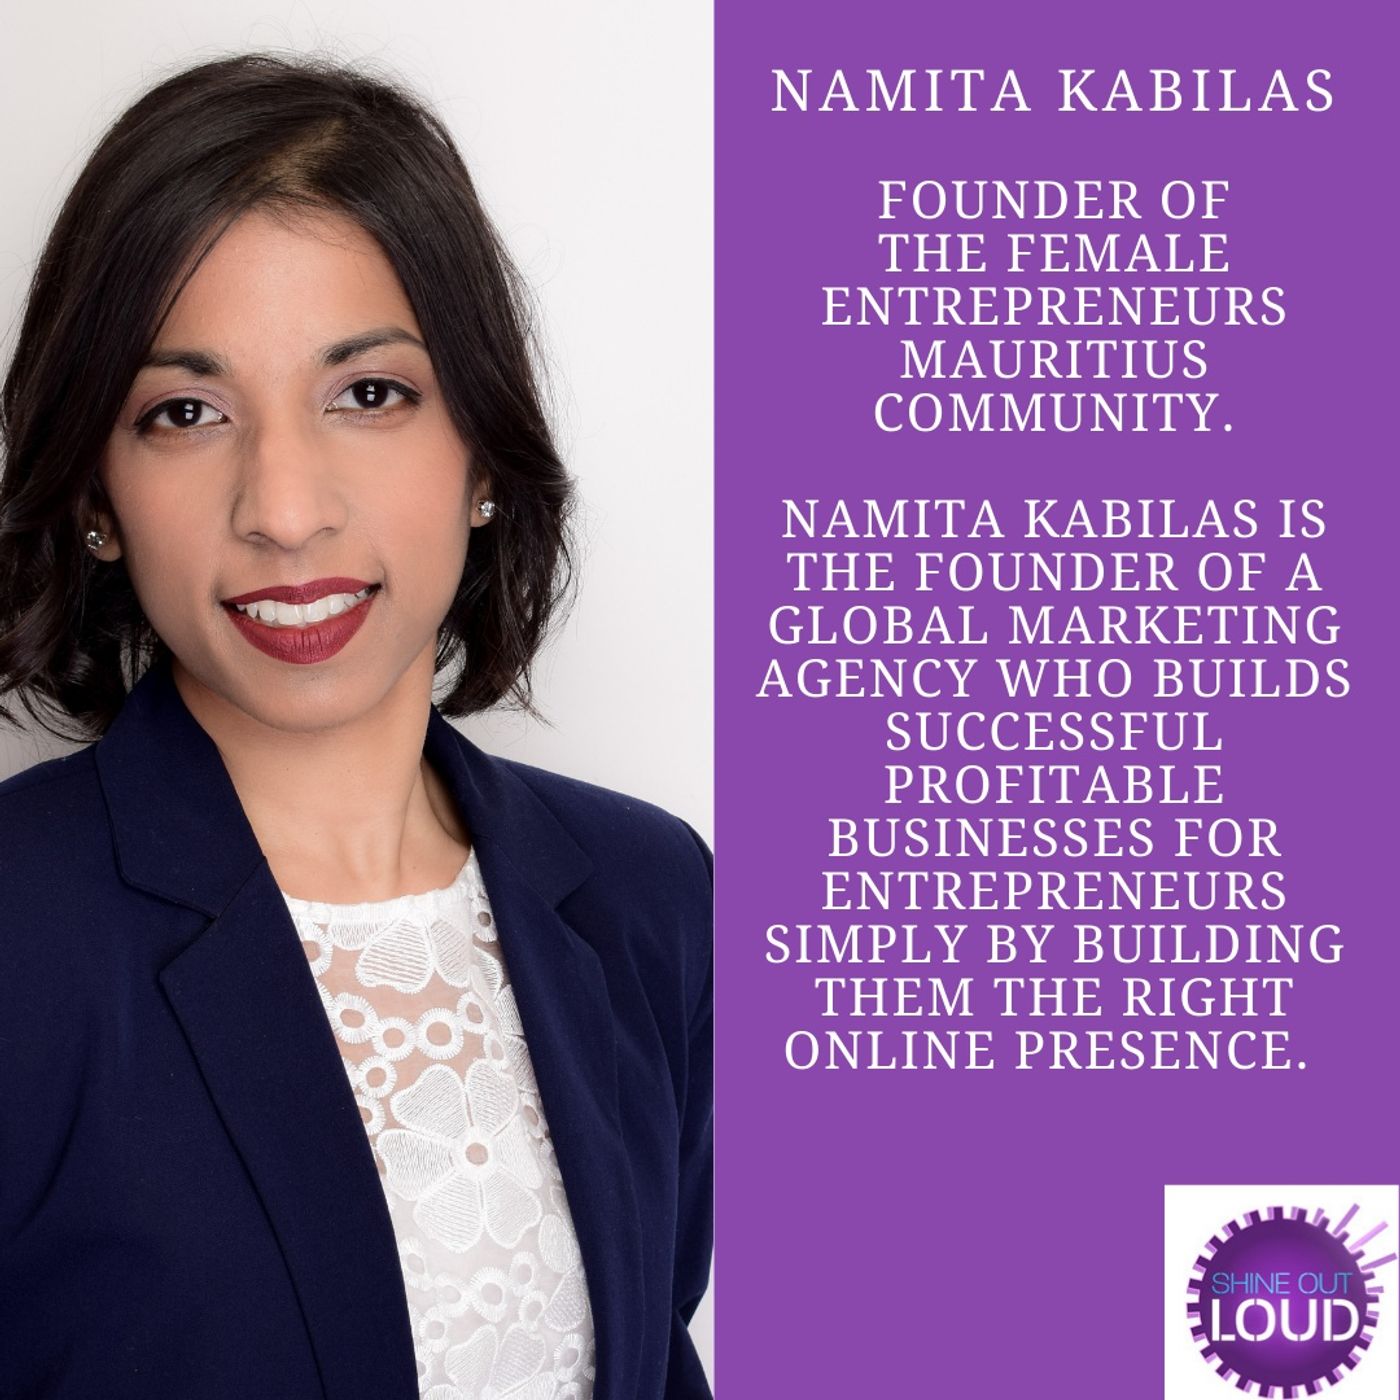 Creating the Right Opportunities the Visual Way with Namita Kabilas